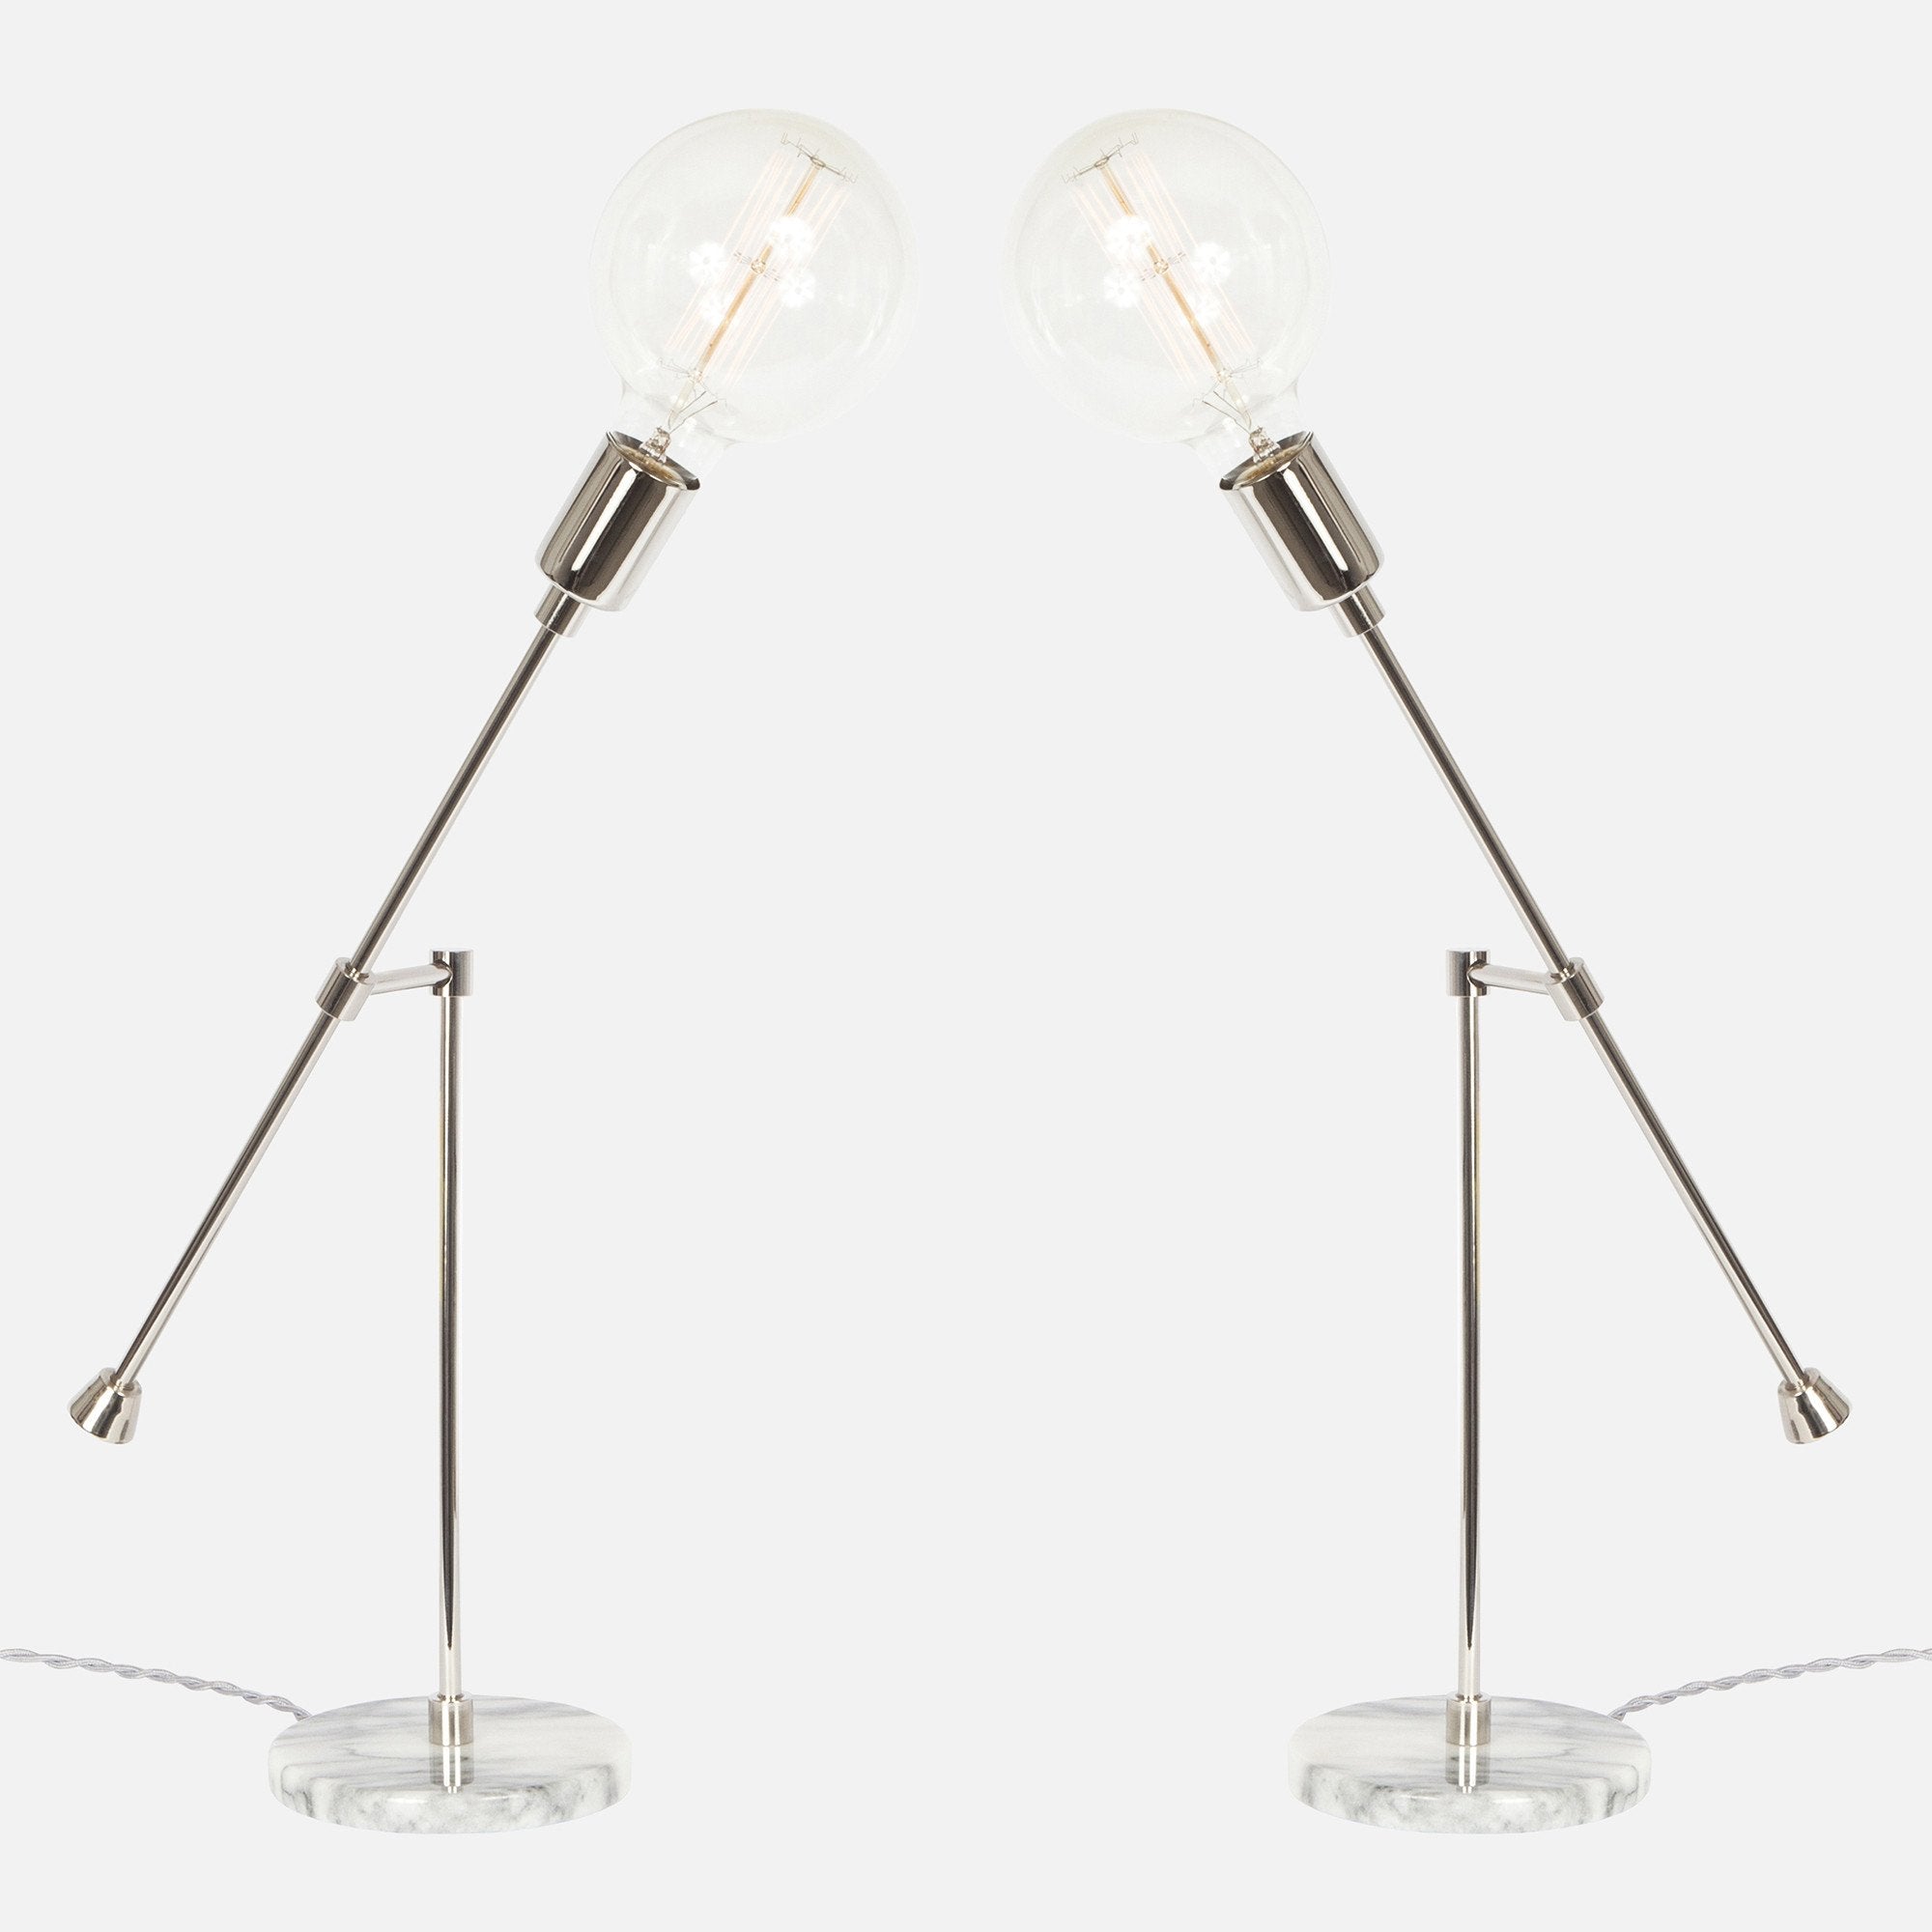 Counterbalance Bare Bulb Table Lamp - Polished Nickel - Mirrored Pair